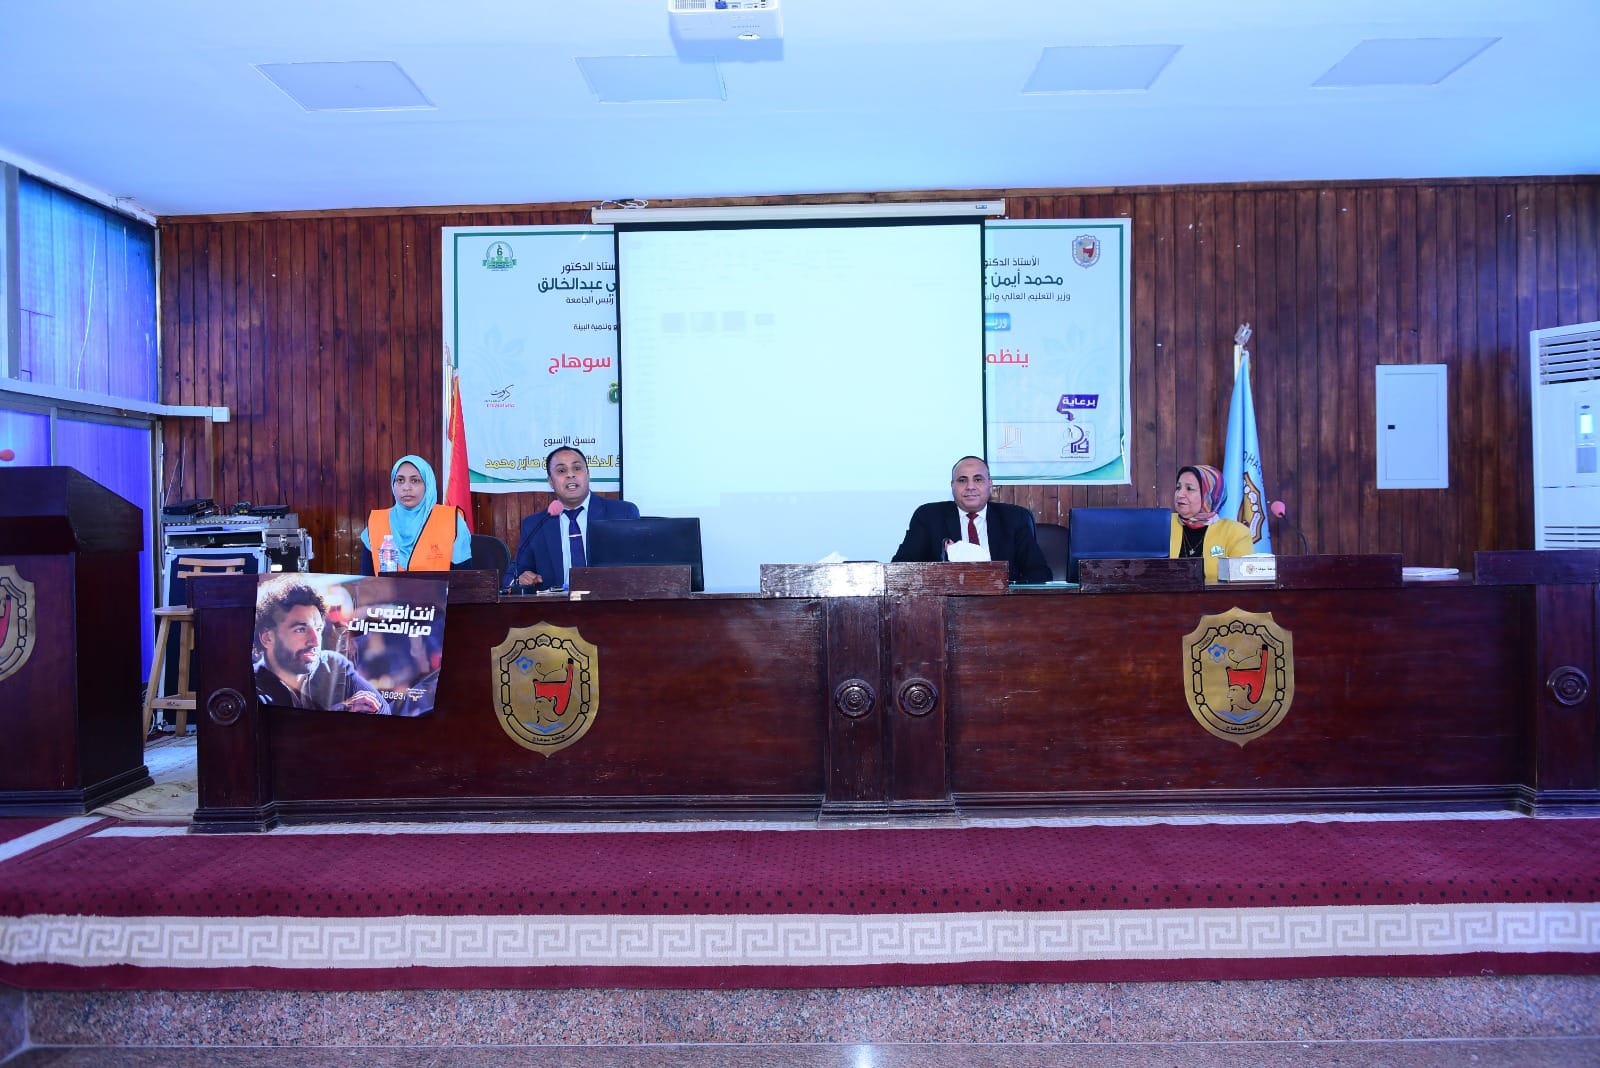 The second day to continue the sixth environmental week at Sohag University